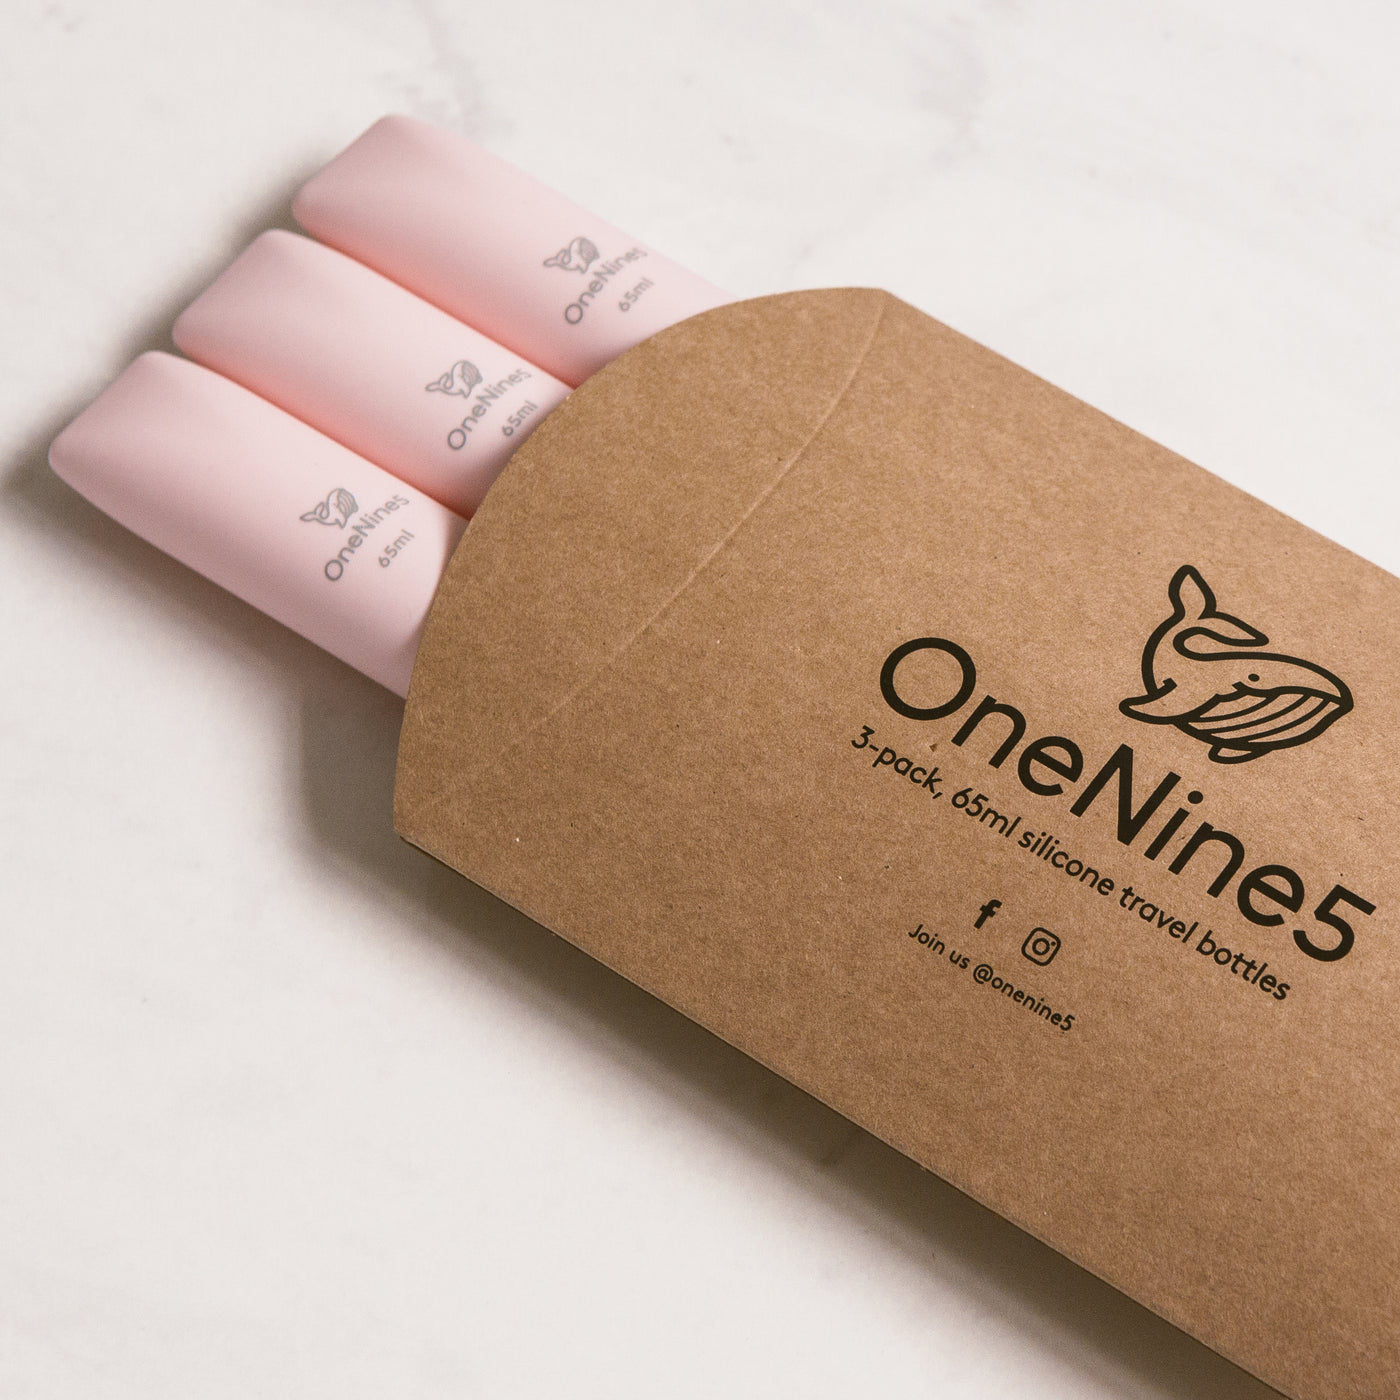 3 pack of pink silicone travel bottles are packed inside brown, recyclable kraft paper. The packaging is branded with a black OneNine5 logo